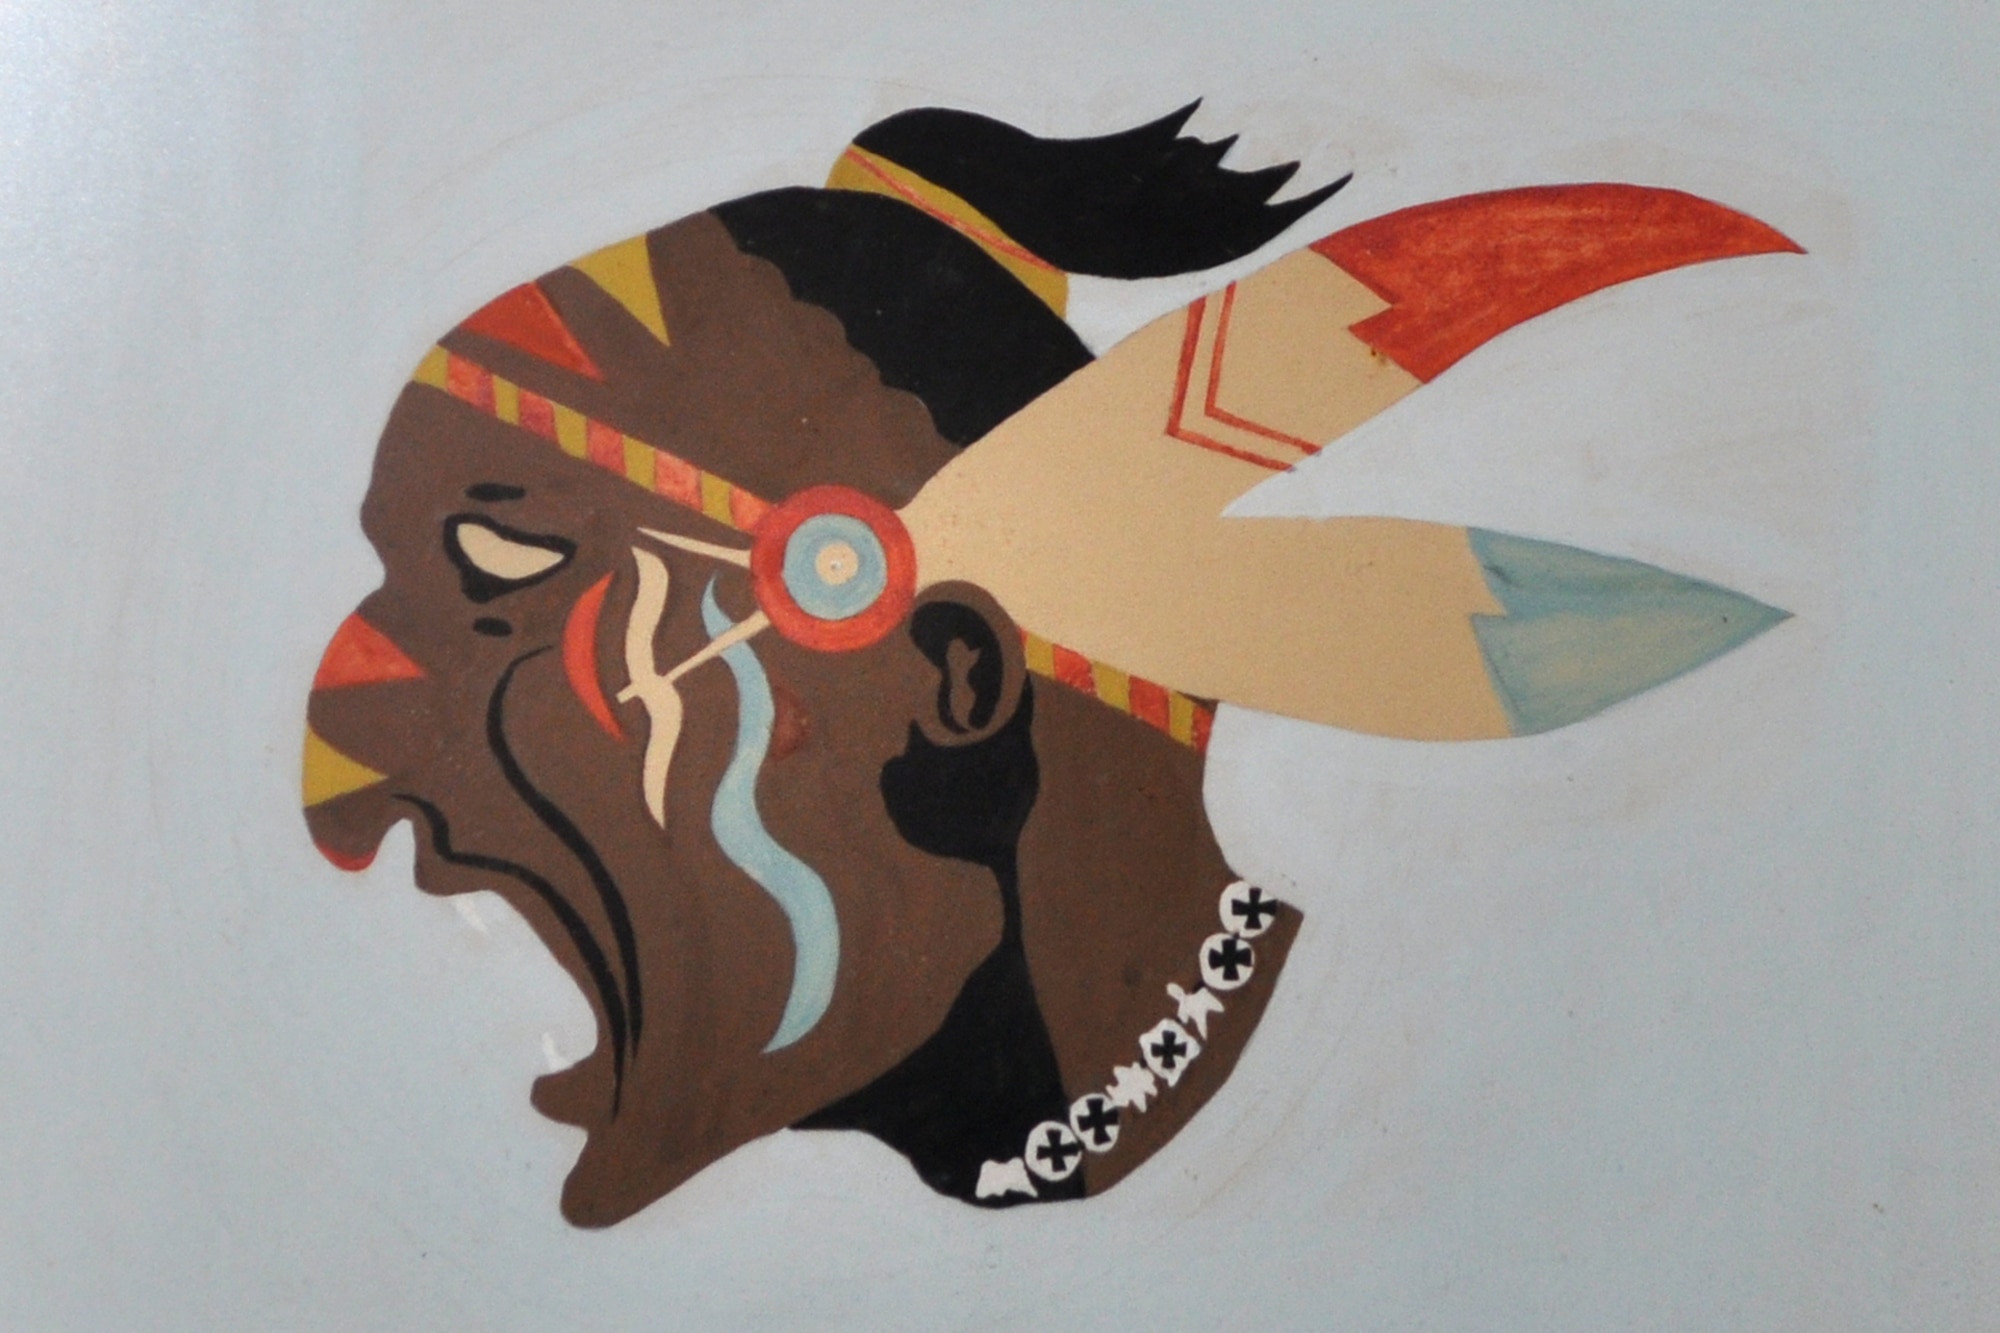 Original “Indian Head” design for the 93rd Bomb Squadron. It was conceived by 1st Lt. Charles R. D’Olive in France during WWI. Lieutenant D’Olive went on to shoot down five German aircraft during the war and received the Distinguished Service Cross for downing three German aircraft in one day on September 13, 1918. (U.S. Air Force photo/Tech. Sgt. Jeff Walston) 